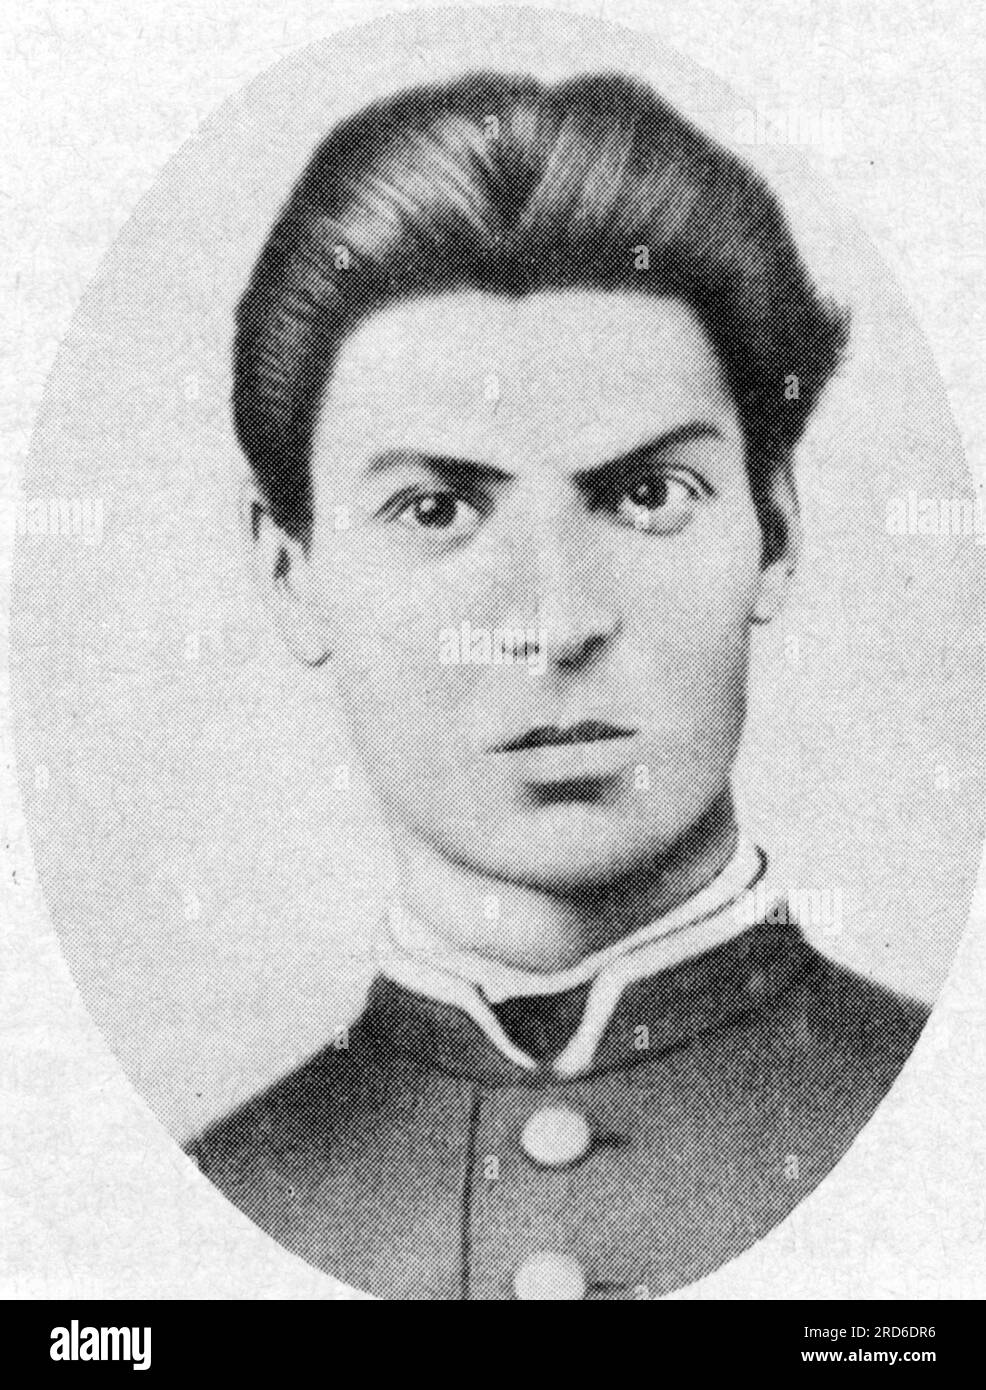 Volov, Panayot, 1850 - 26.5.1876, Bulgarian freedom fighter, 19th century, ADDITIONAL-RIGHTS-CLEARANCE-INFO-NOT-AVAILABLE Stock Photo